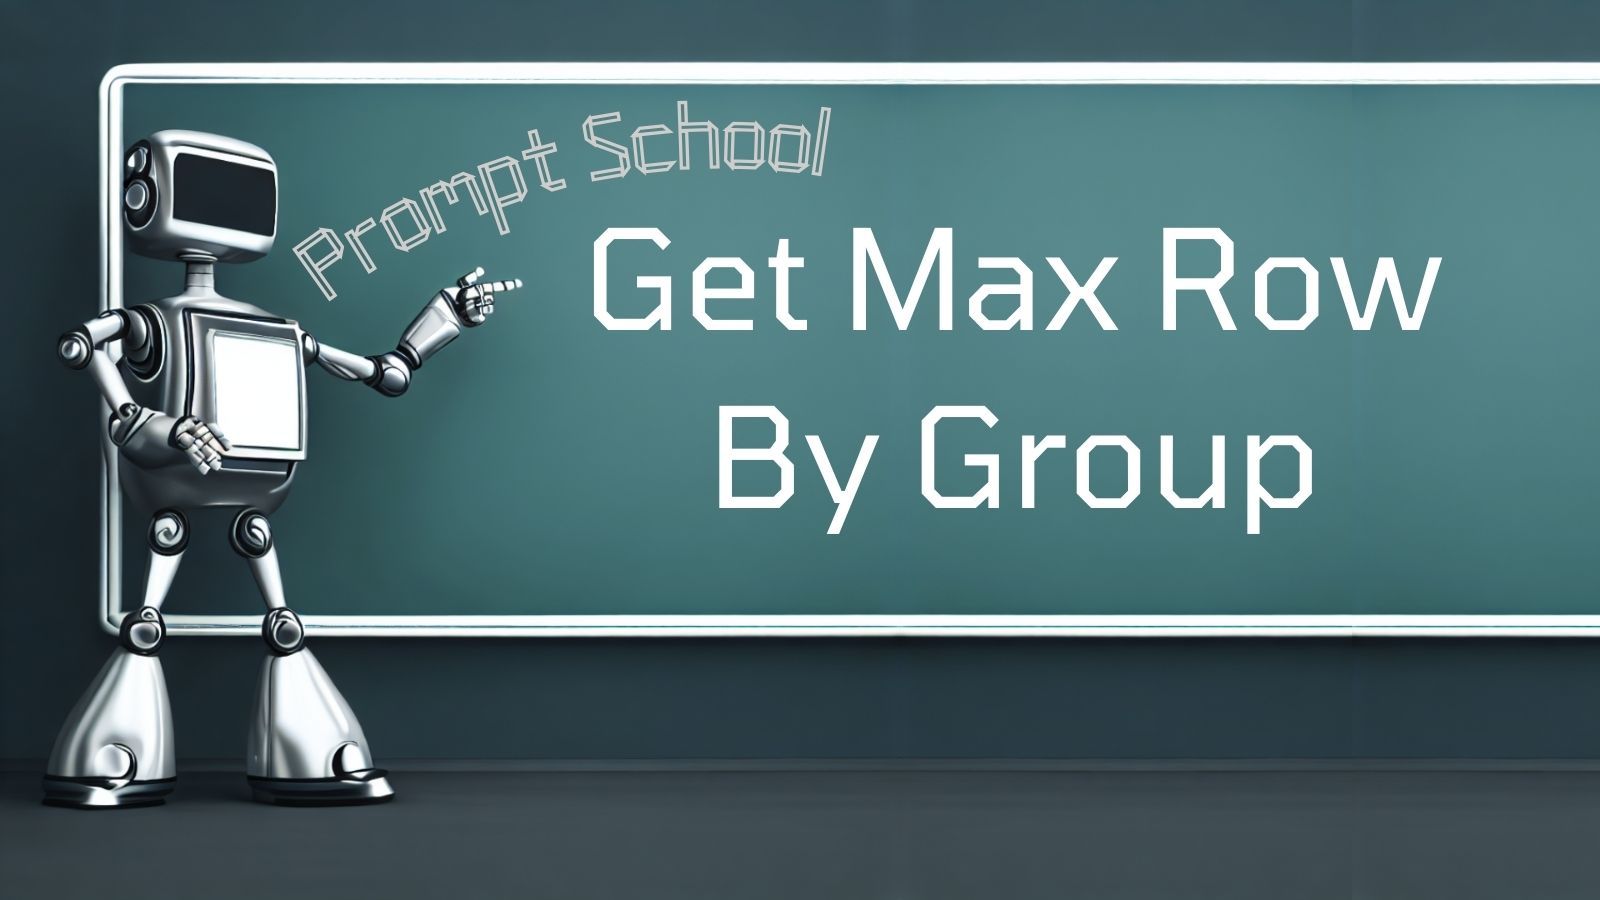 Get Max Row by Group with ChatGPT